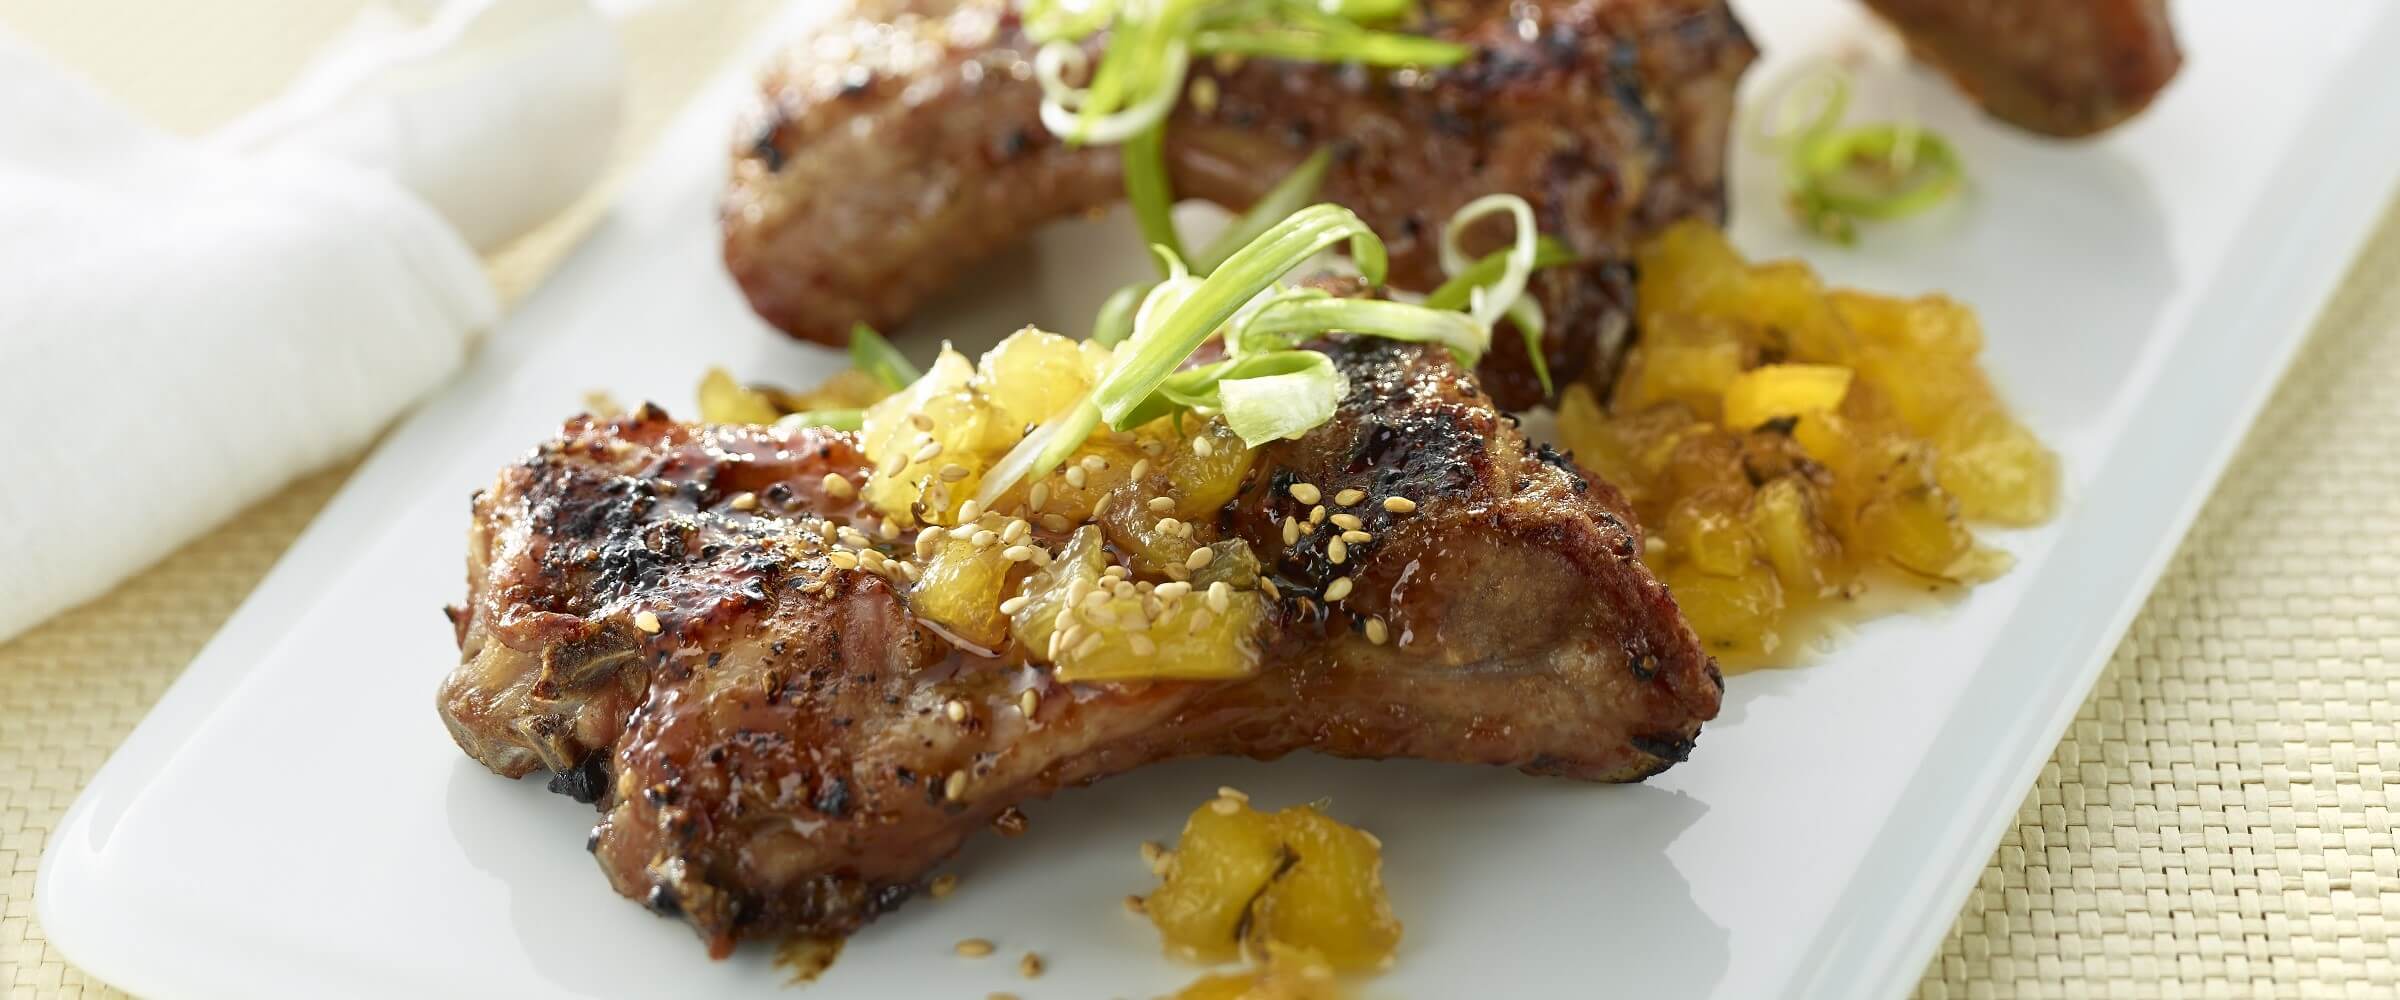 sticky pork ribs with pineapple chutney on white plate with green onions